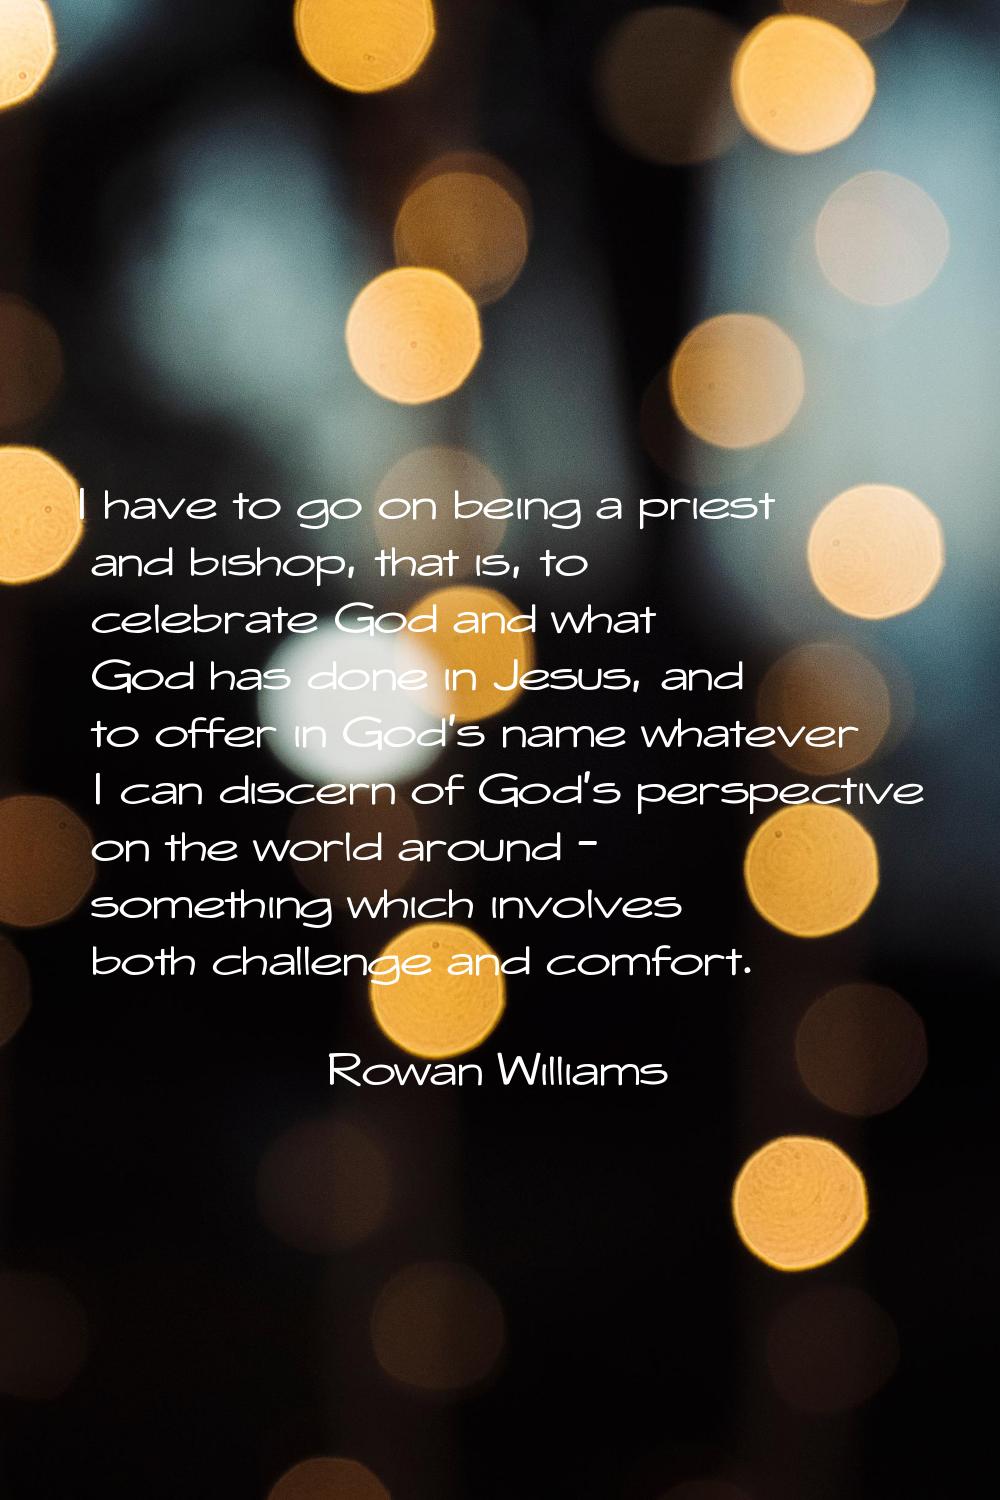 I have to go on being a priest and bishop, that is, to celebrate God and what God has done in Jesus